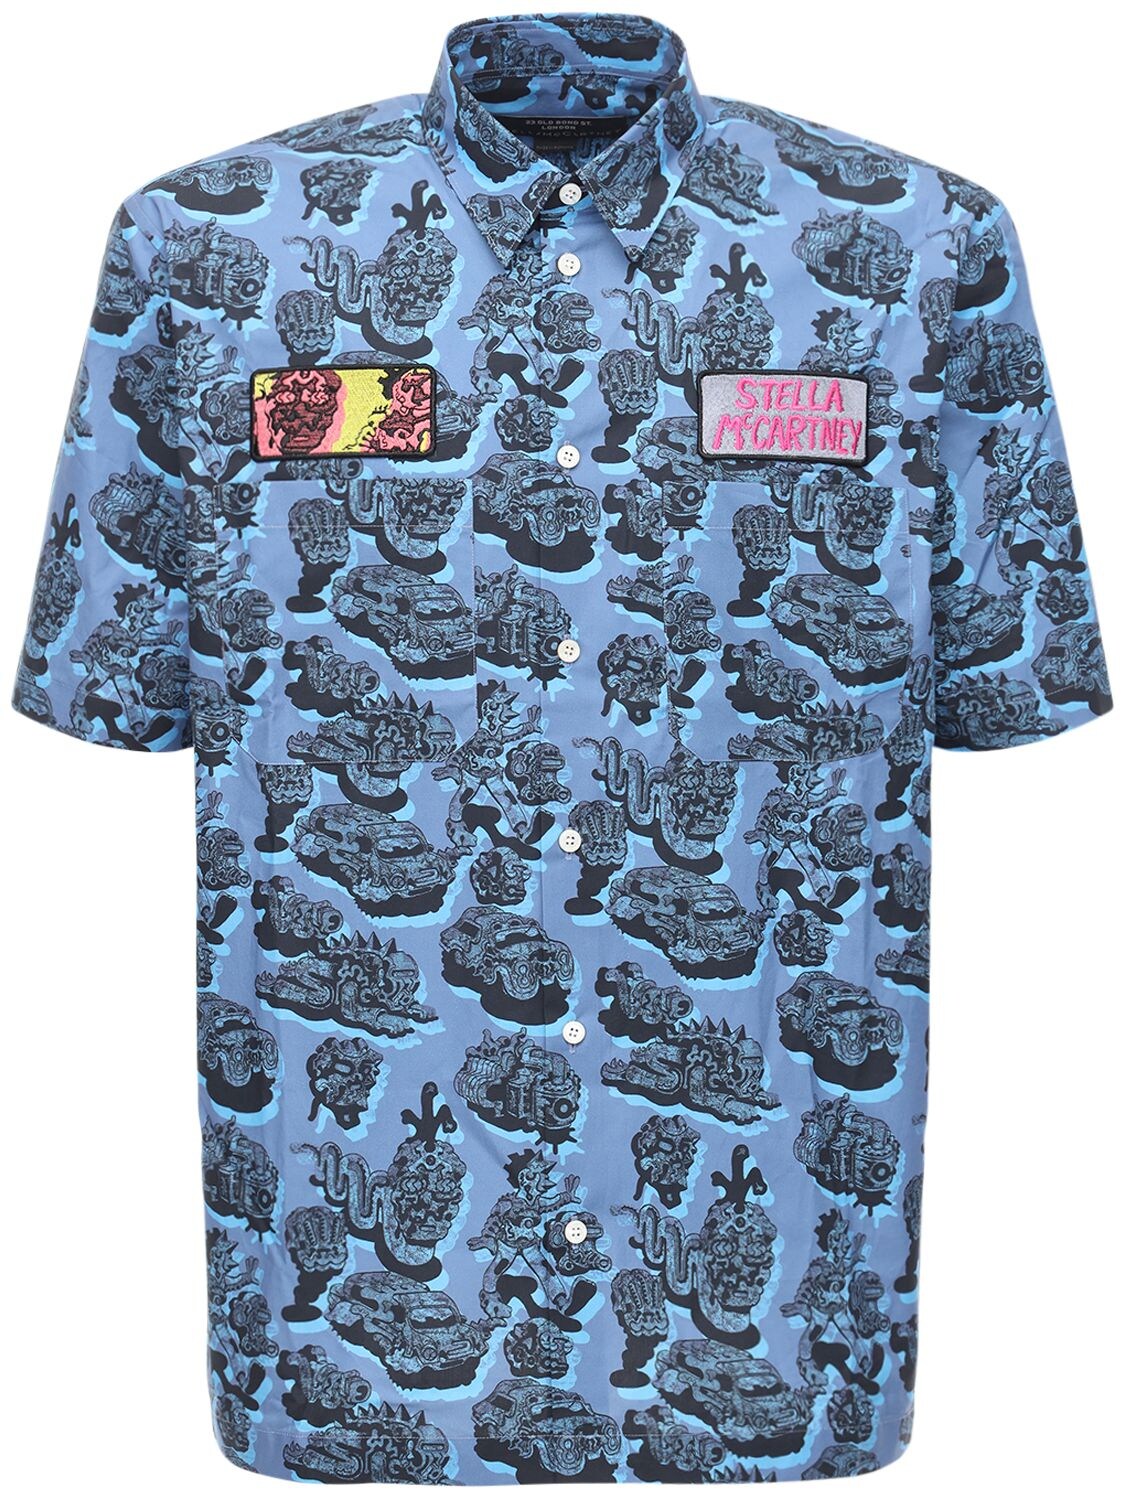 Printed Cotton Shirt W/ Patches